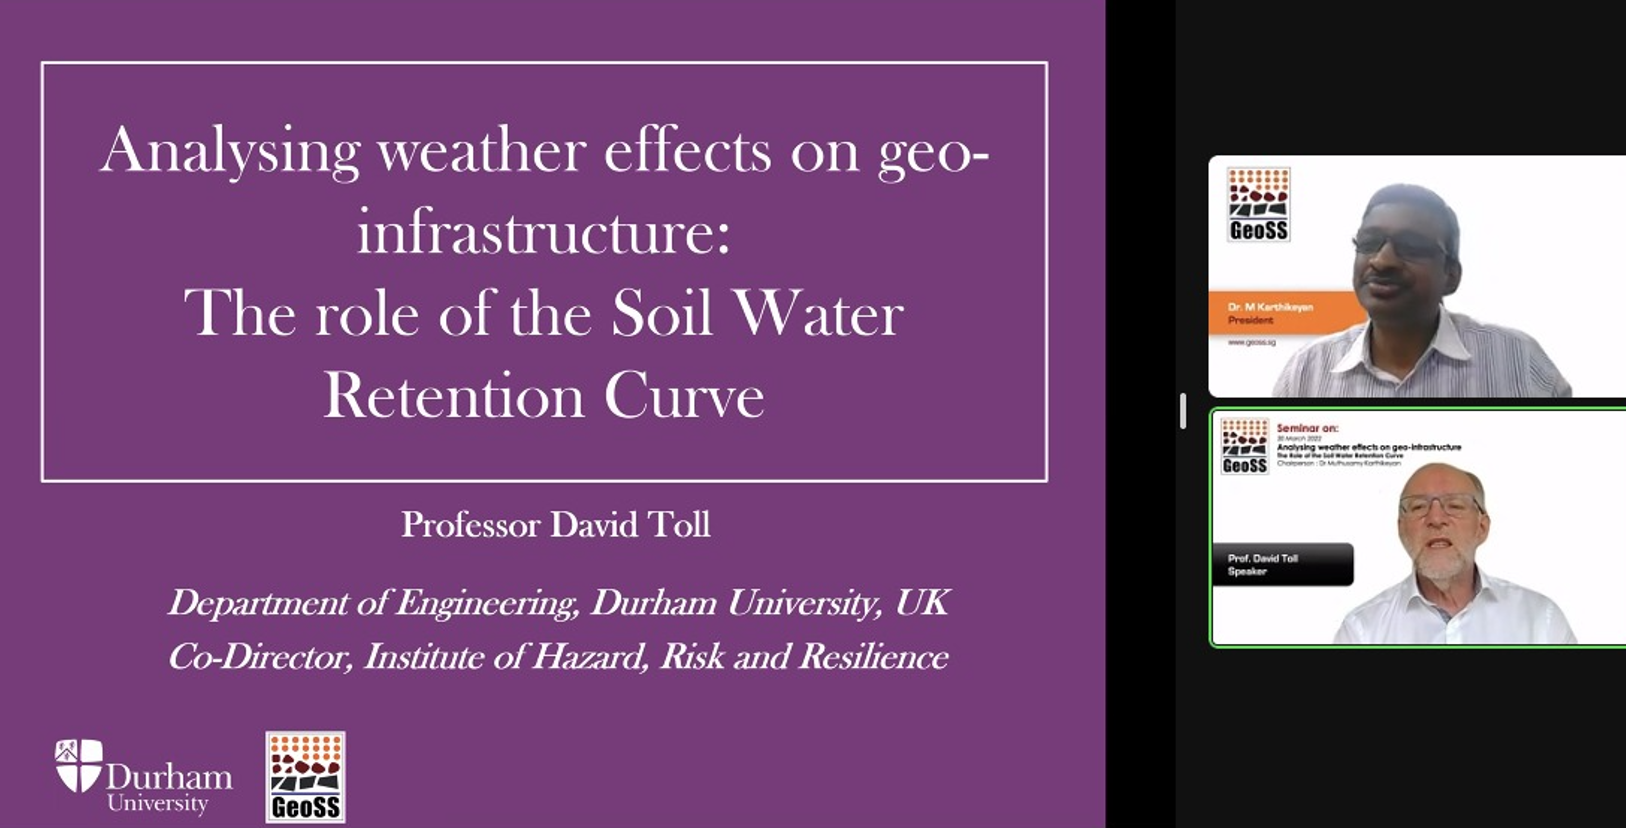 David Toll - on “Analysis of weather effects on geo-infrastructure” on 30th March 2022